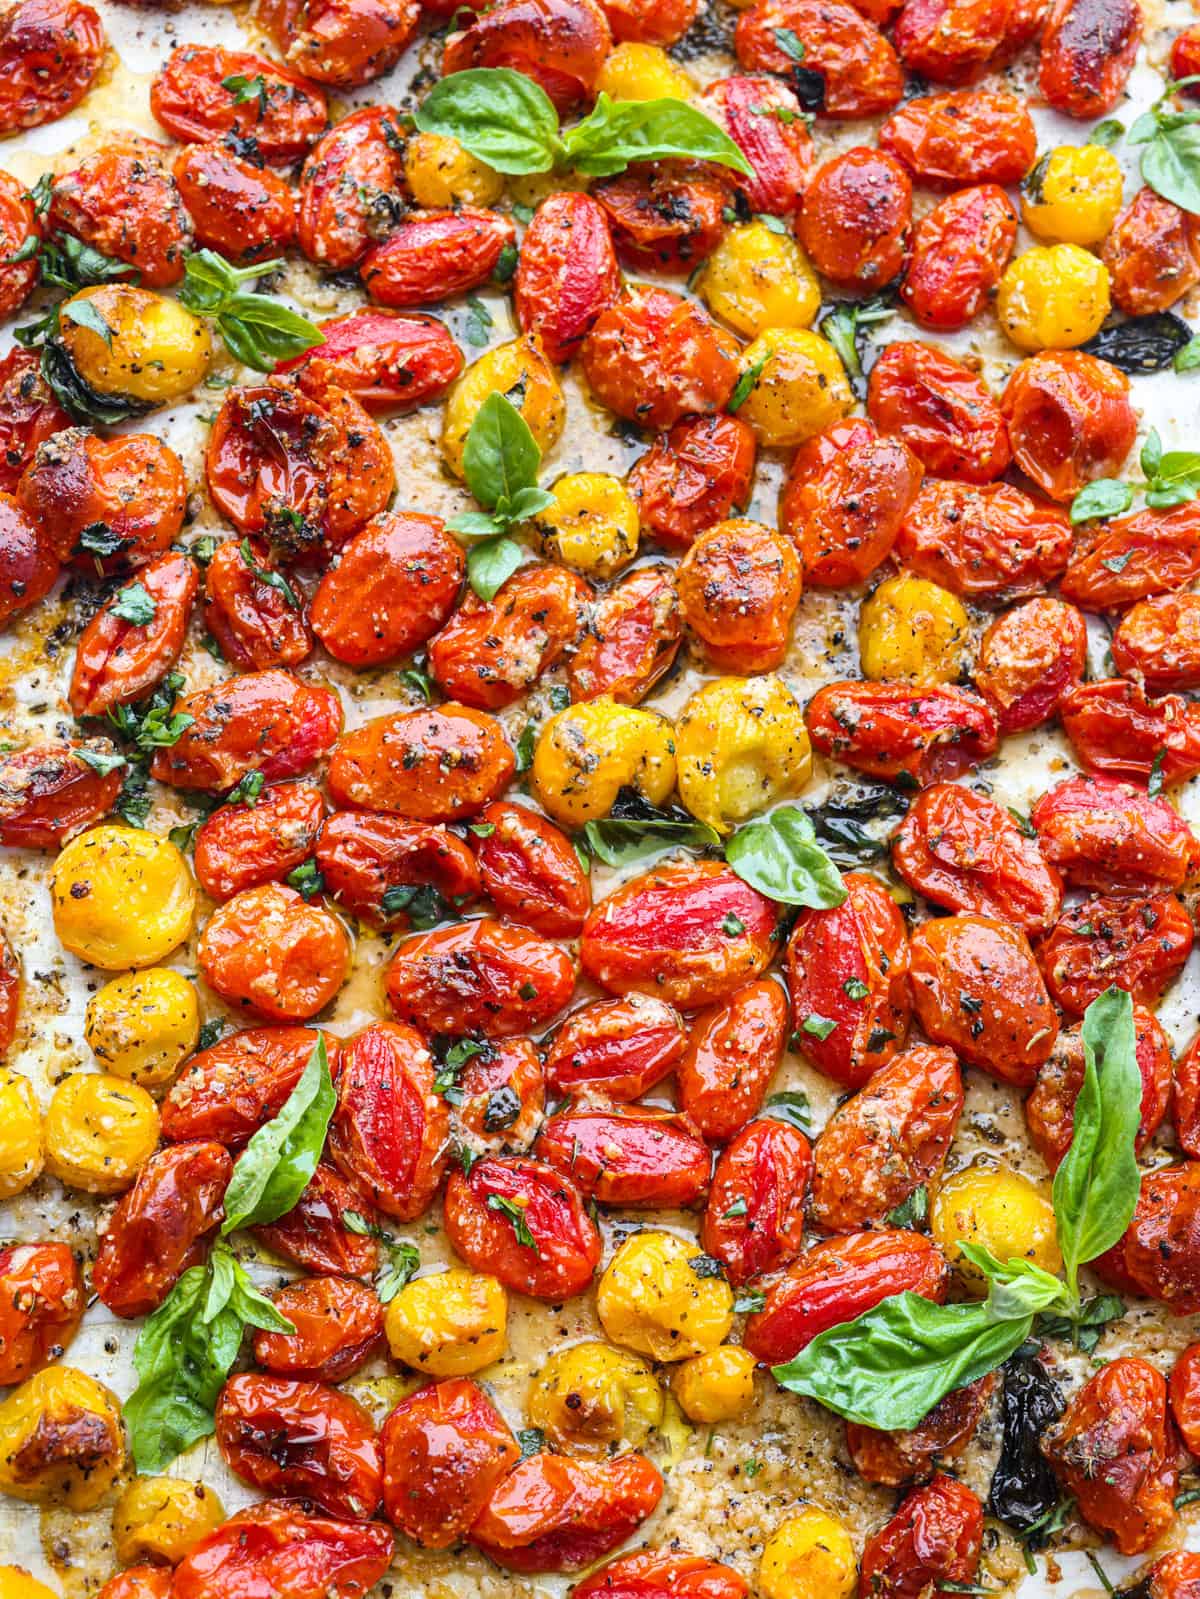 How To Roast Cherry Tomatoes with Garlic & Herbs - The Original Dish